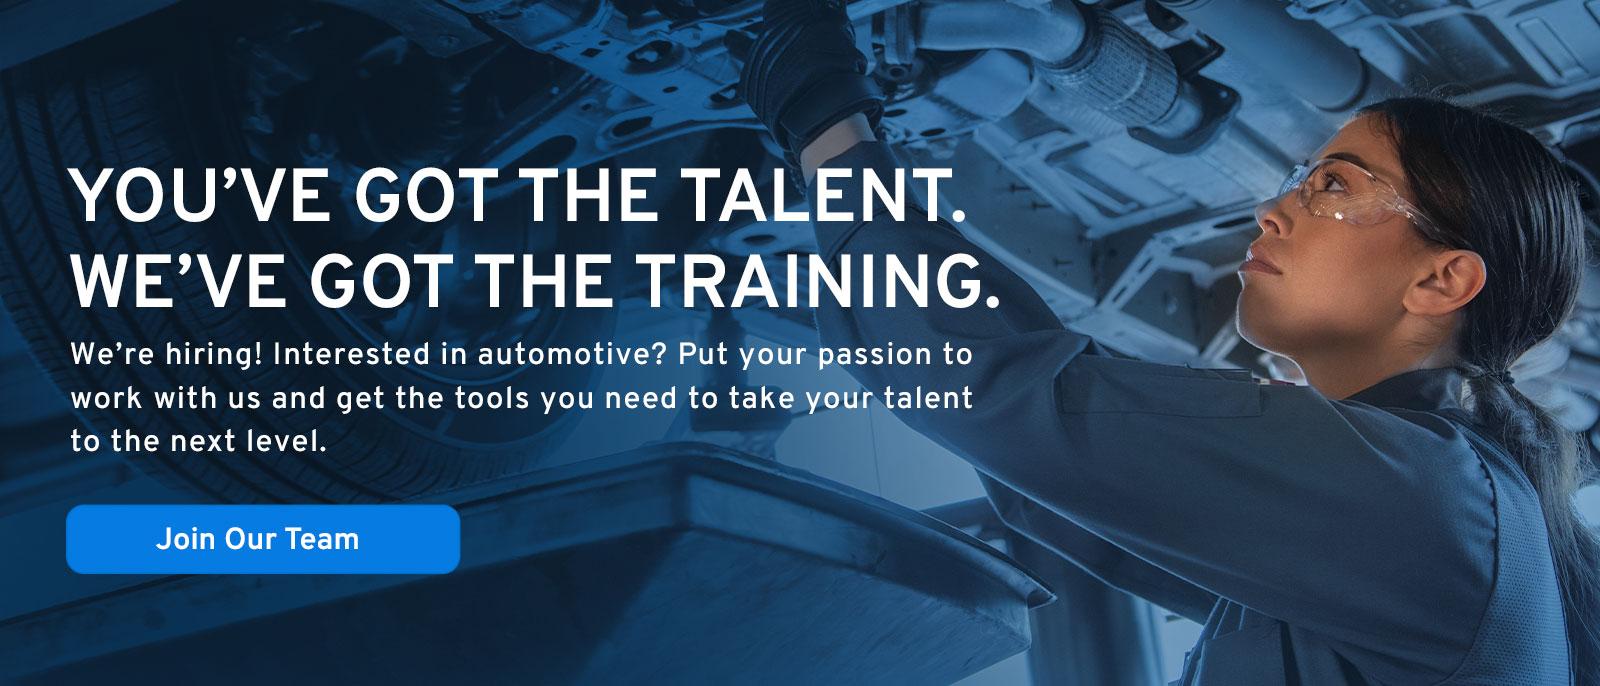 You've got the talend.  We've got the training.